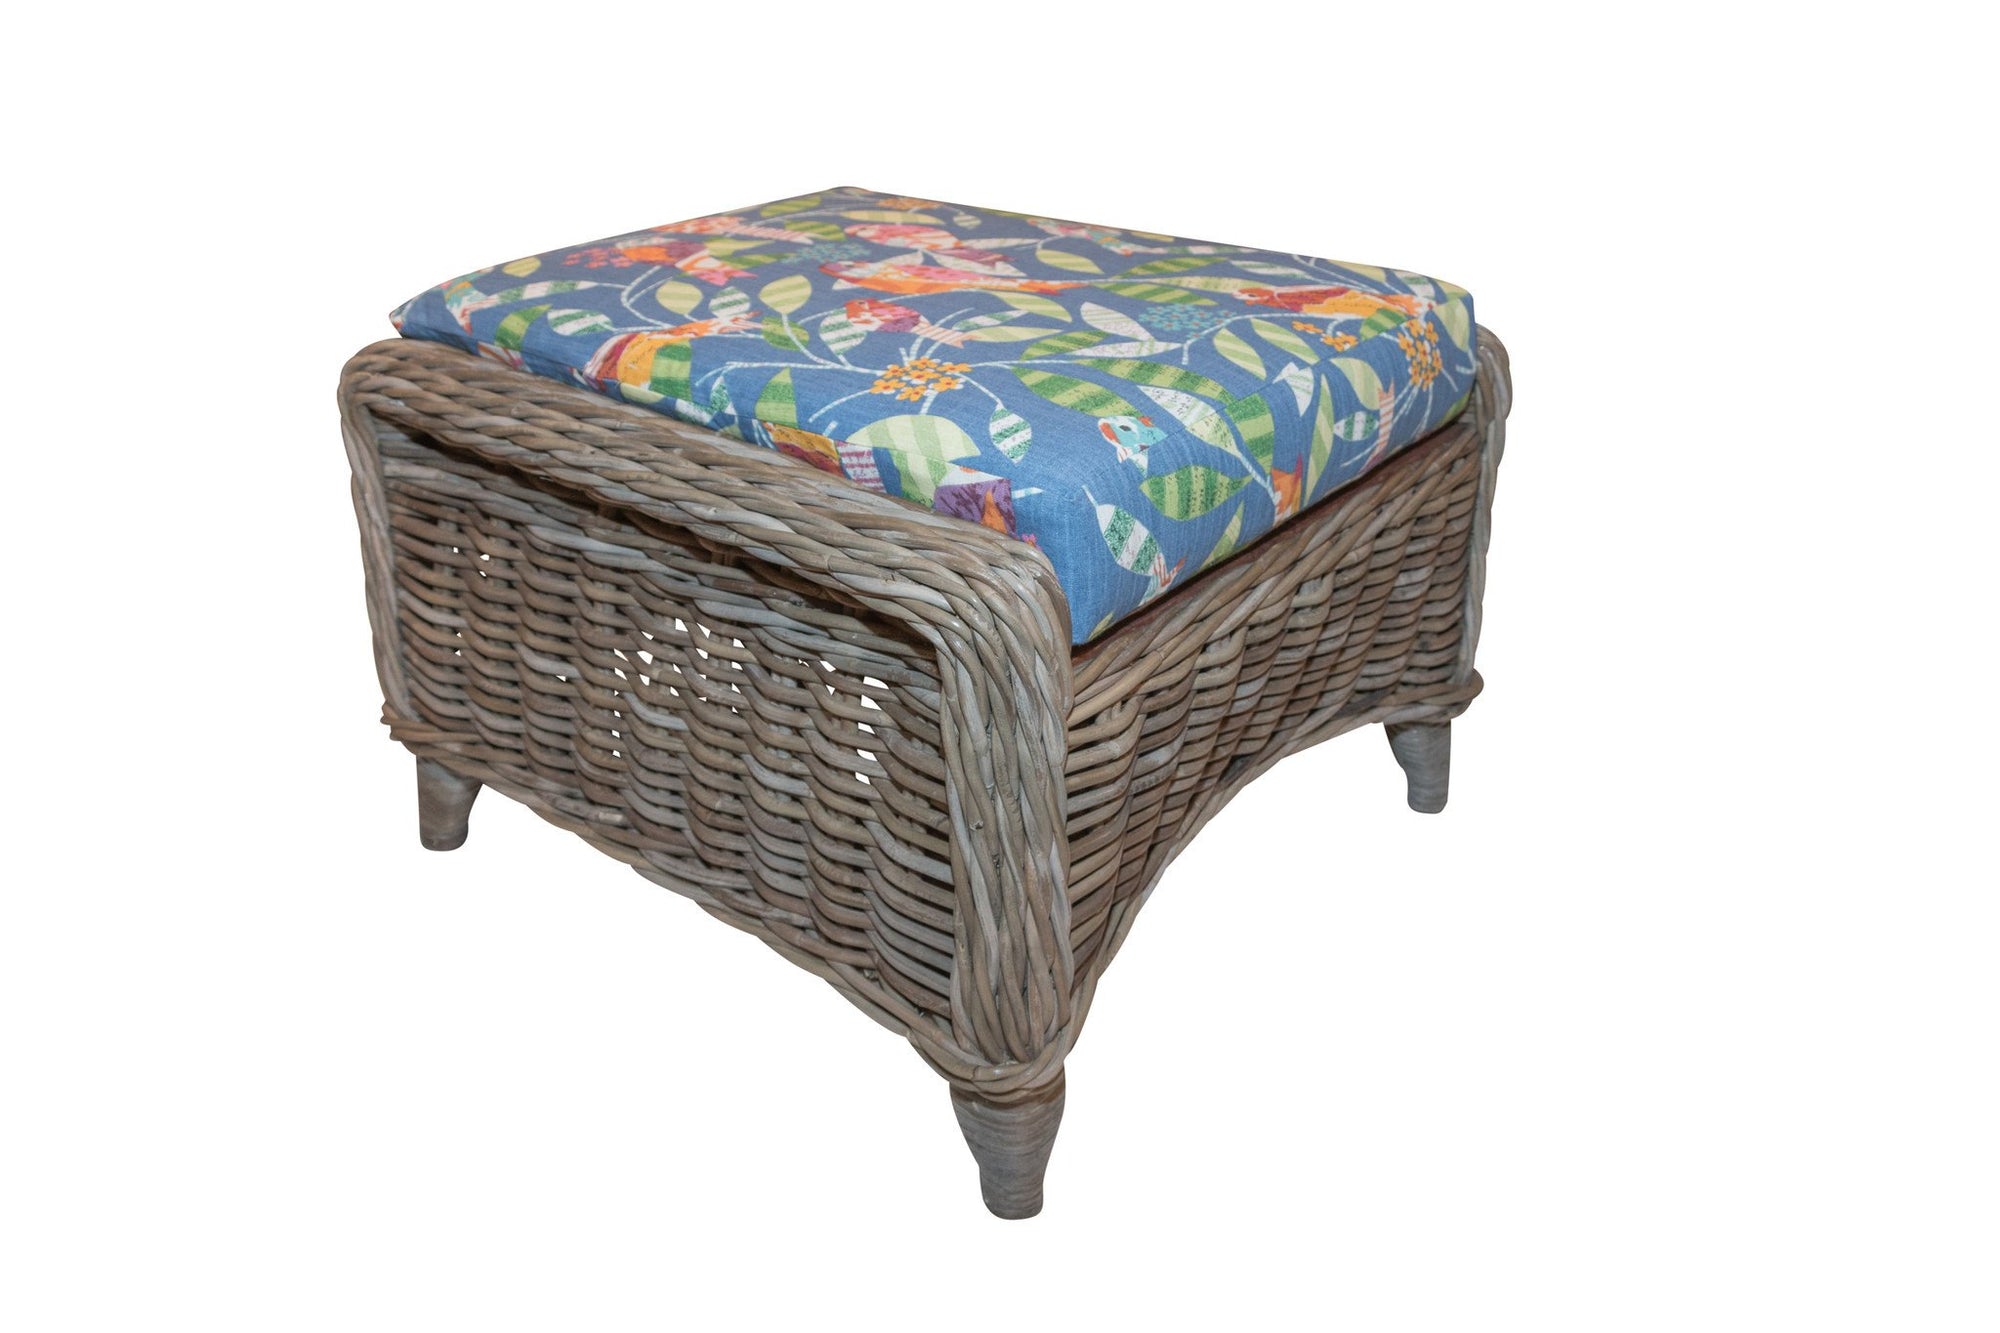 Designer Wicker & Rattan By Tribor Conservatory Ottoman by Designer Wicker from Tribor Ottoman - Rattan Imports